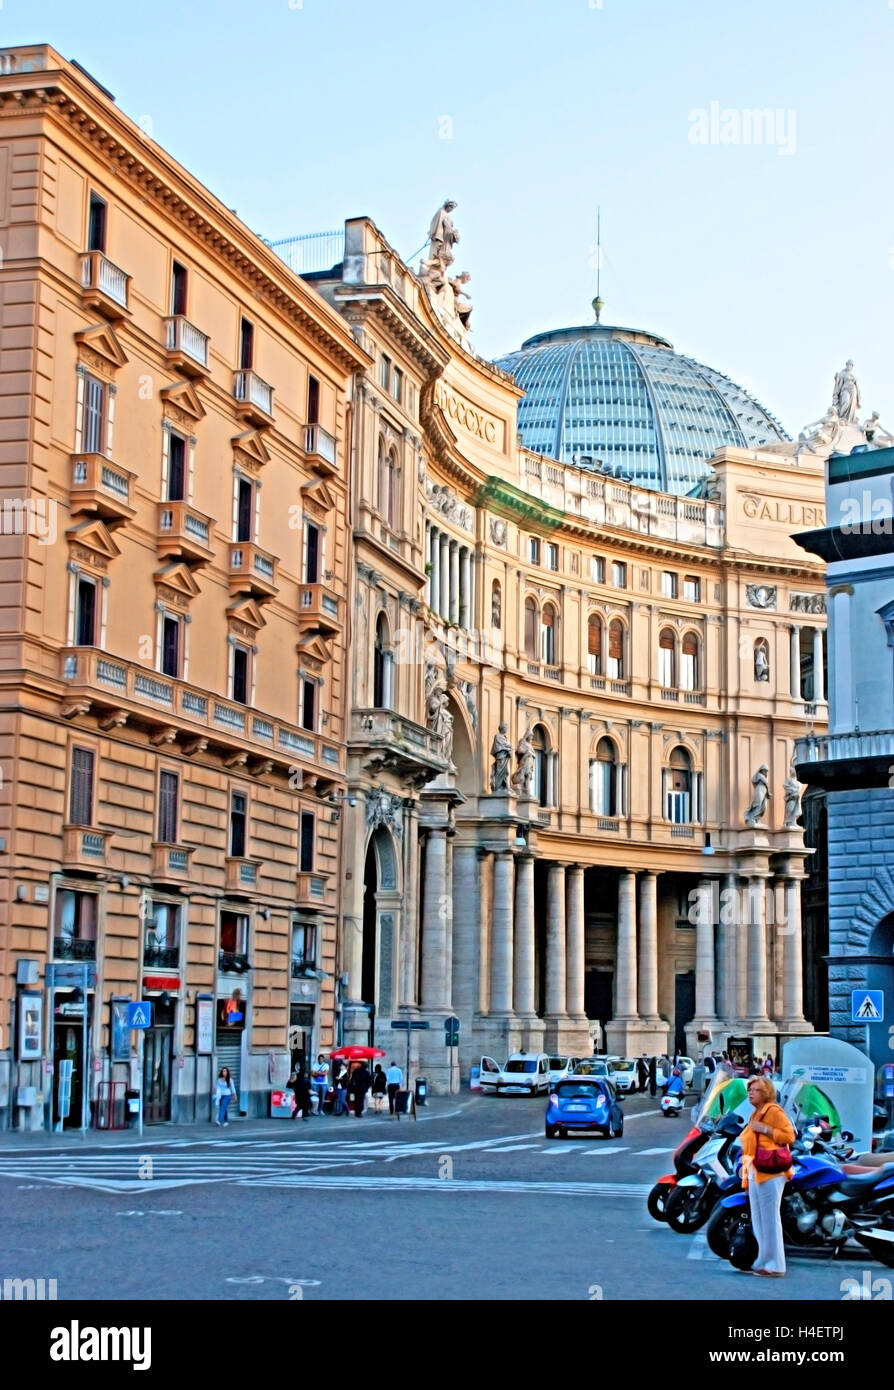 Via San Carlo with a glass dome and high columns of Galleria Umberto I, Naples Italy Stock Photo